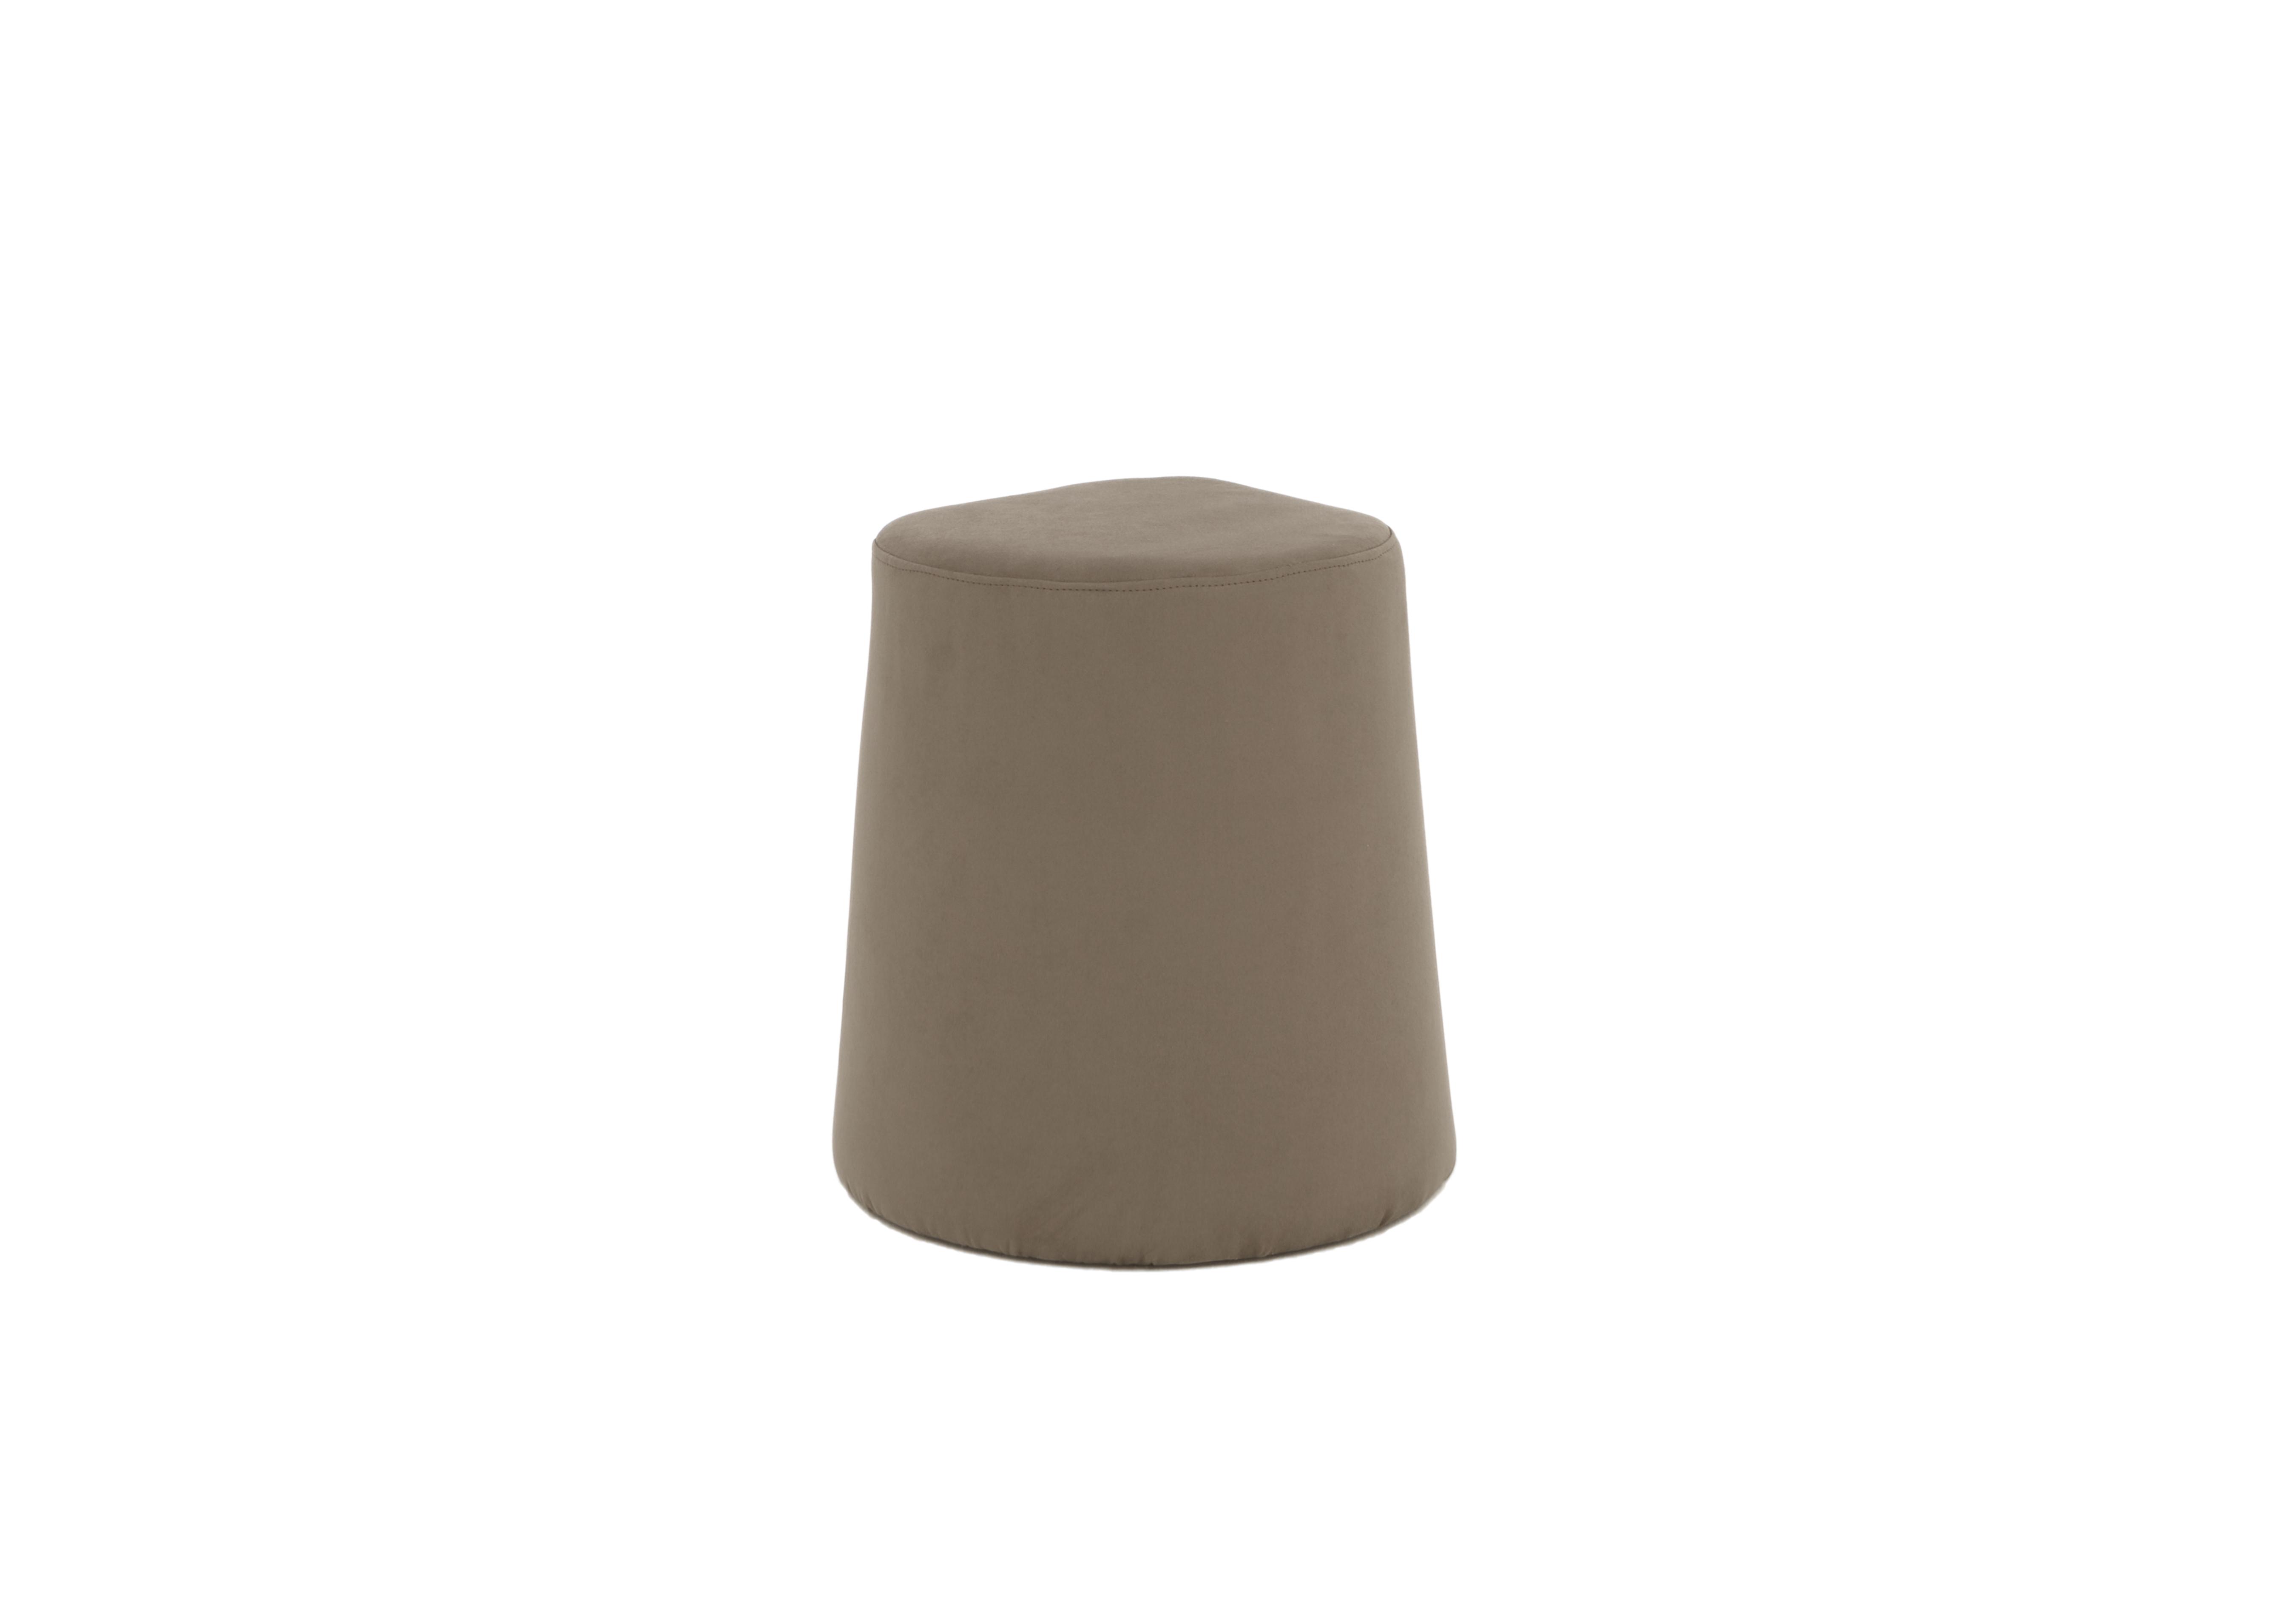 Palazzo Stool in Aquos 08 Taupe on Furniture Village